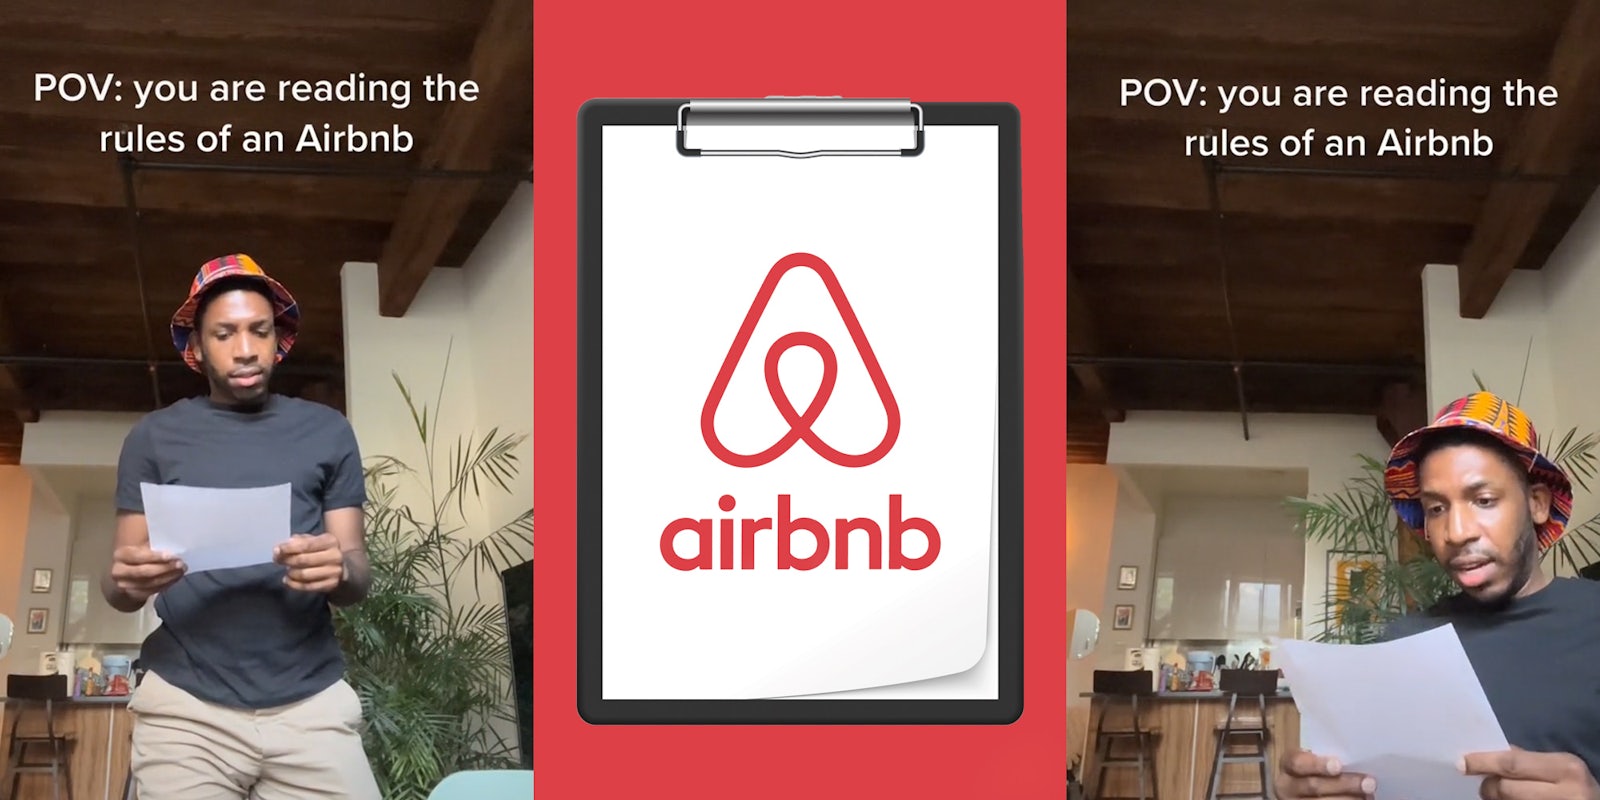 man standing holding paper caption 'POV: you are reading the rules of an Airbnb' (l) Airbnb logo on clipboard on red background (c) man sitting on couch reading paper caption 'POV: you are reading the rules of an Airbnb' (r)